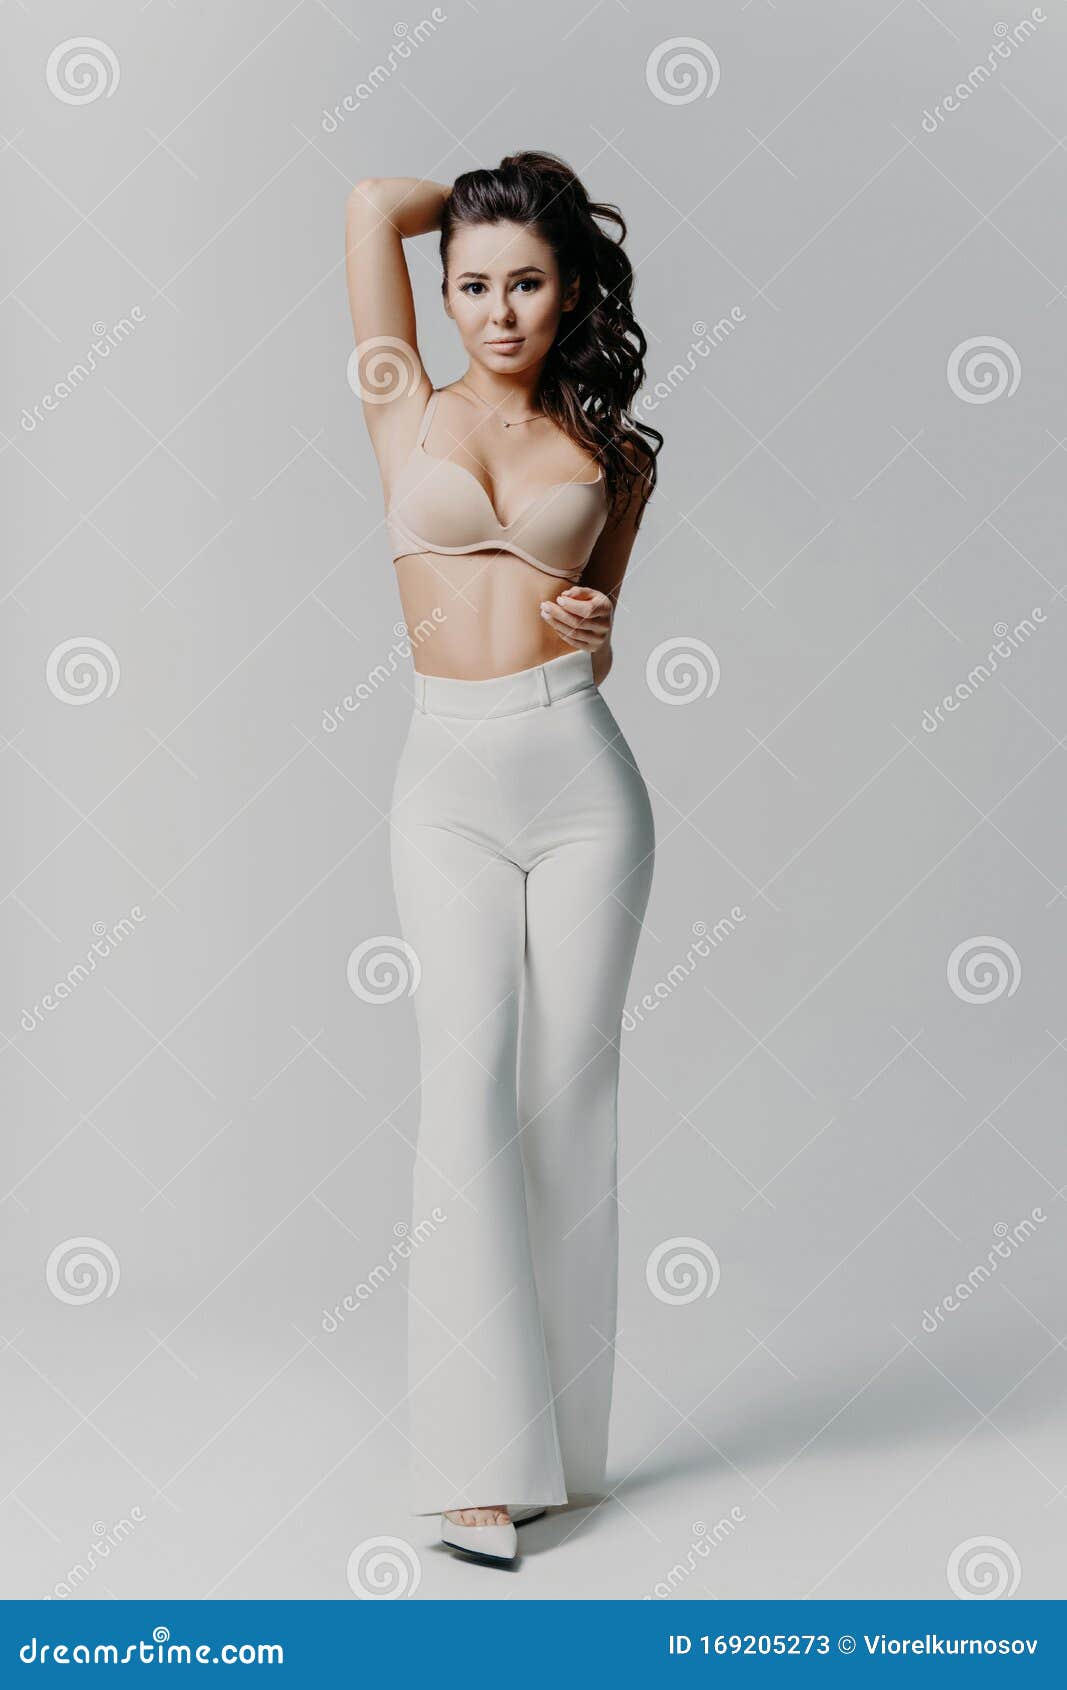 Pretty Dark Haired Young Woman Wears Bra and White Trousers, Keeps Hand  Behind Head, Has Perfect Body, Stands in Full Length Stock Image - Image of  model, body: 169205273